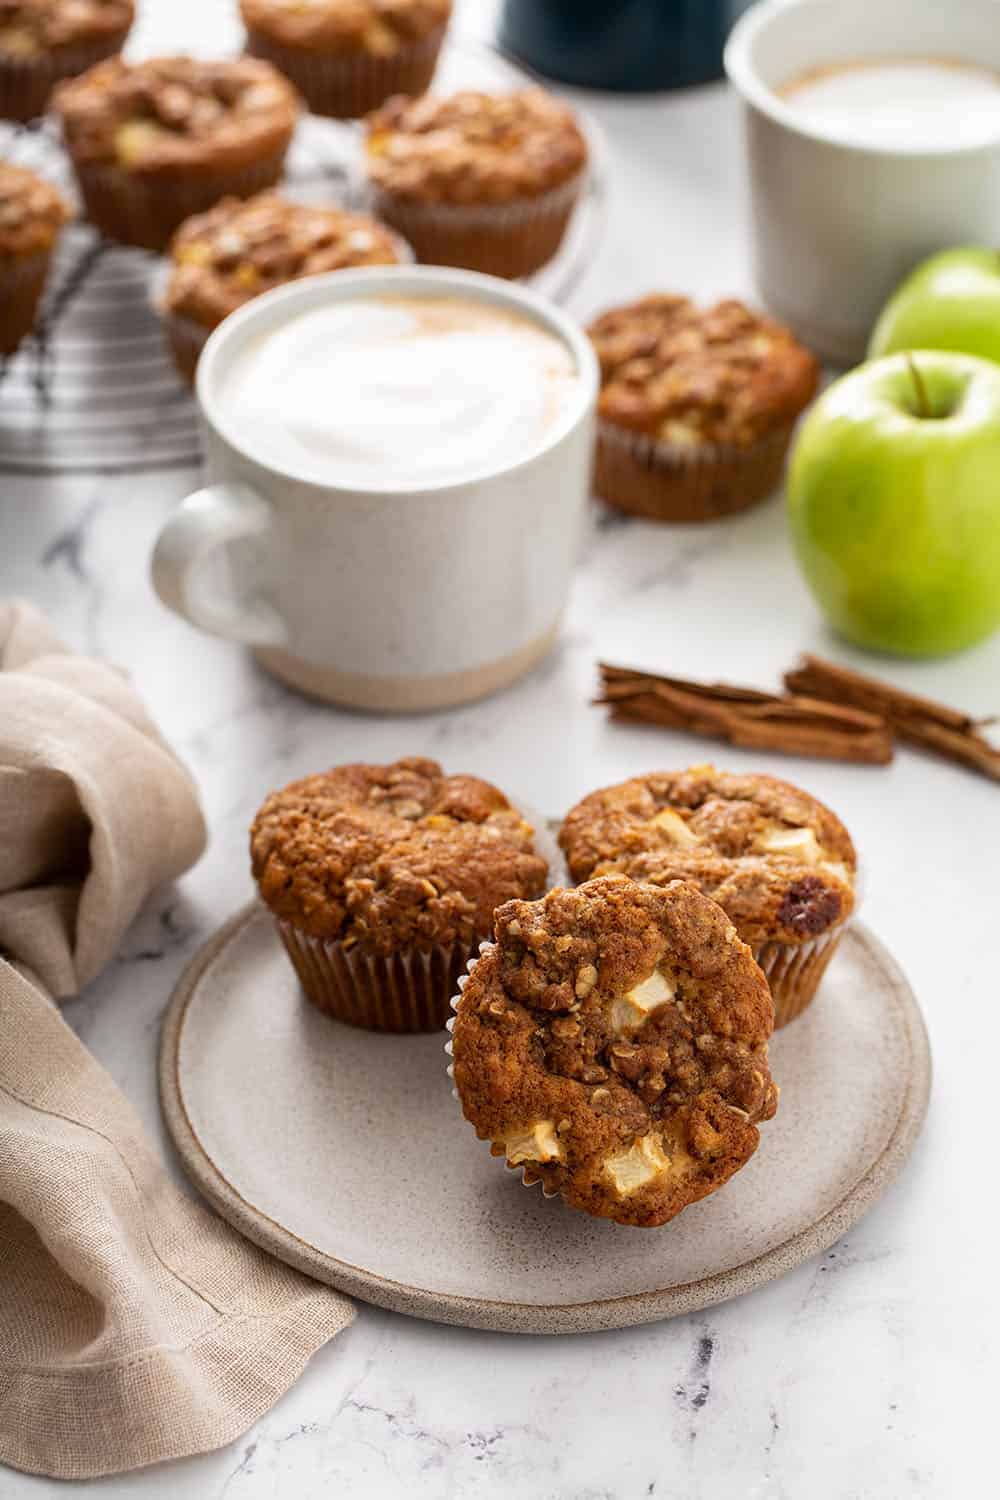 Apple Cinnamon Muffins with Streusel Topping | My Baking Addiction